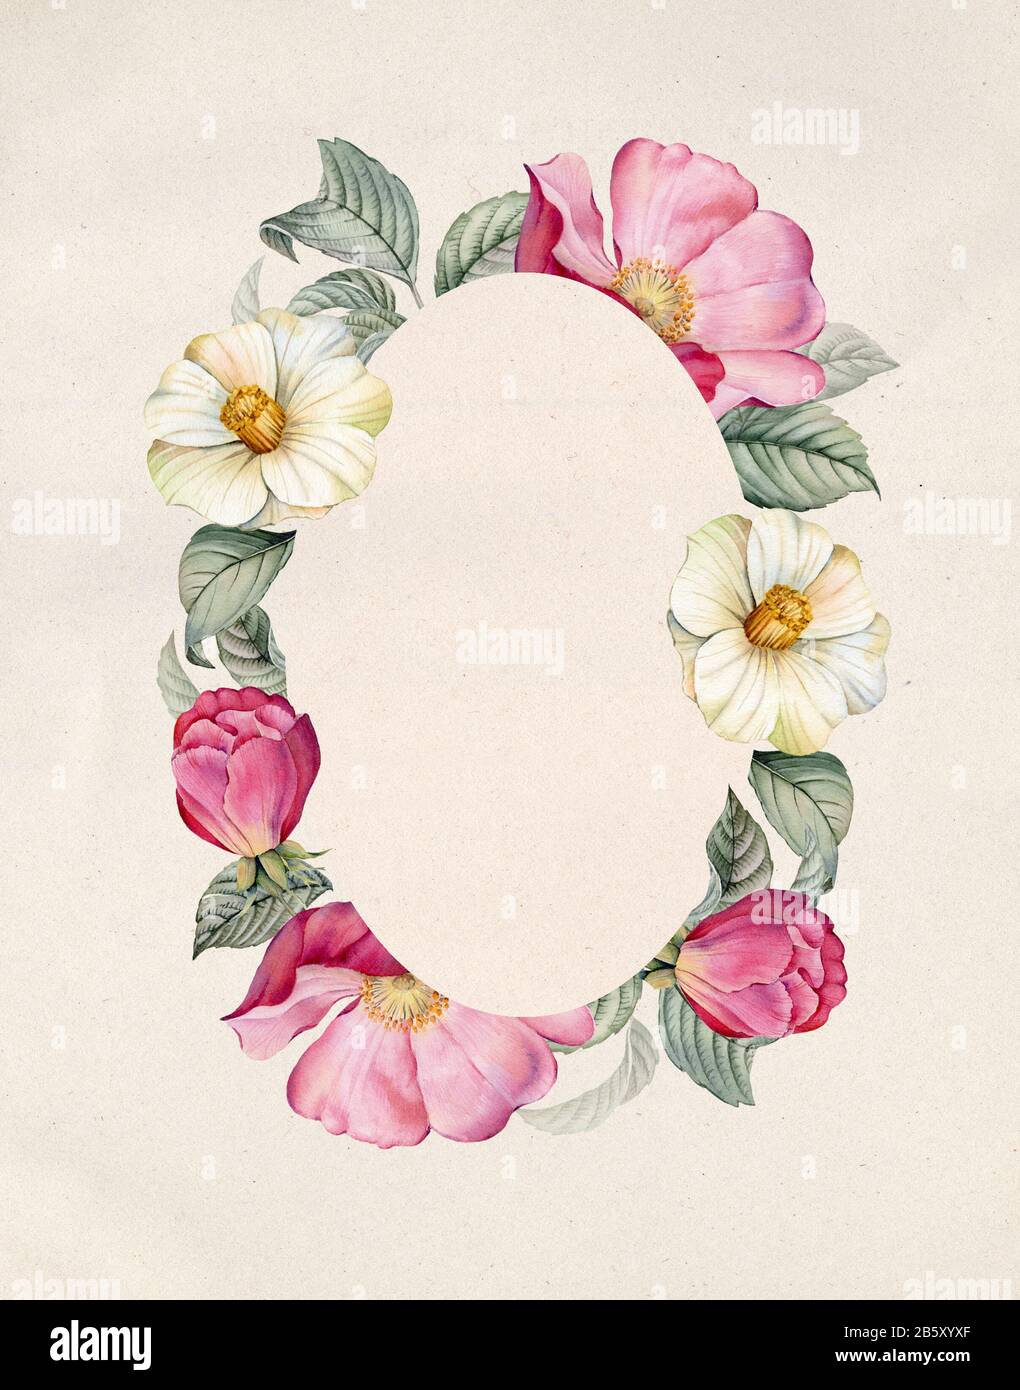 Watercolor floral banner with camellia and rose hip. Oval frame on craft paper. Place for text. Realistic leaves and briar flowers. Vintage botanical Stock Photo